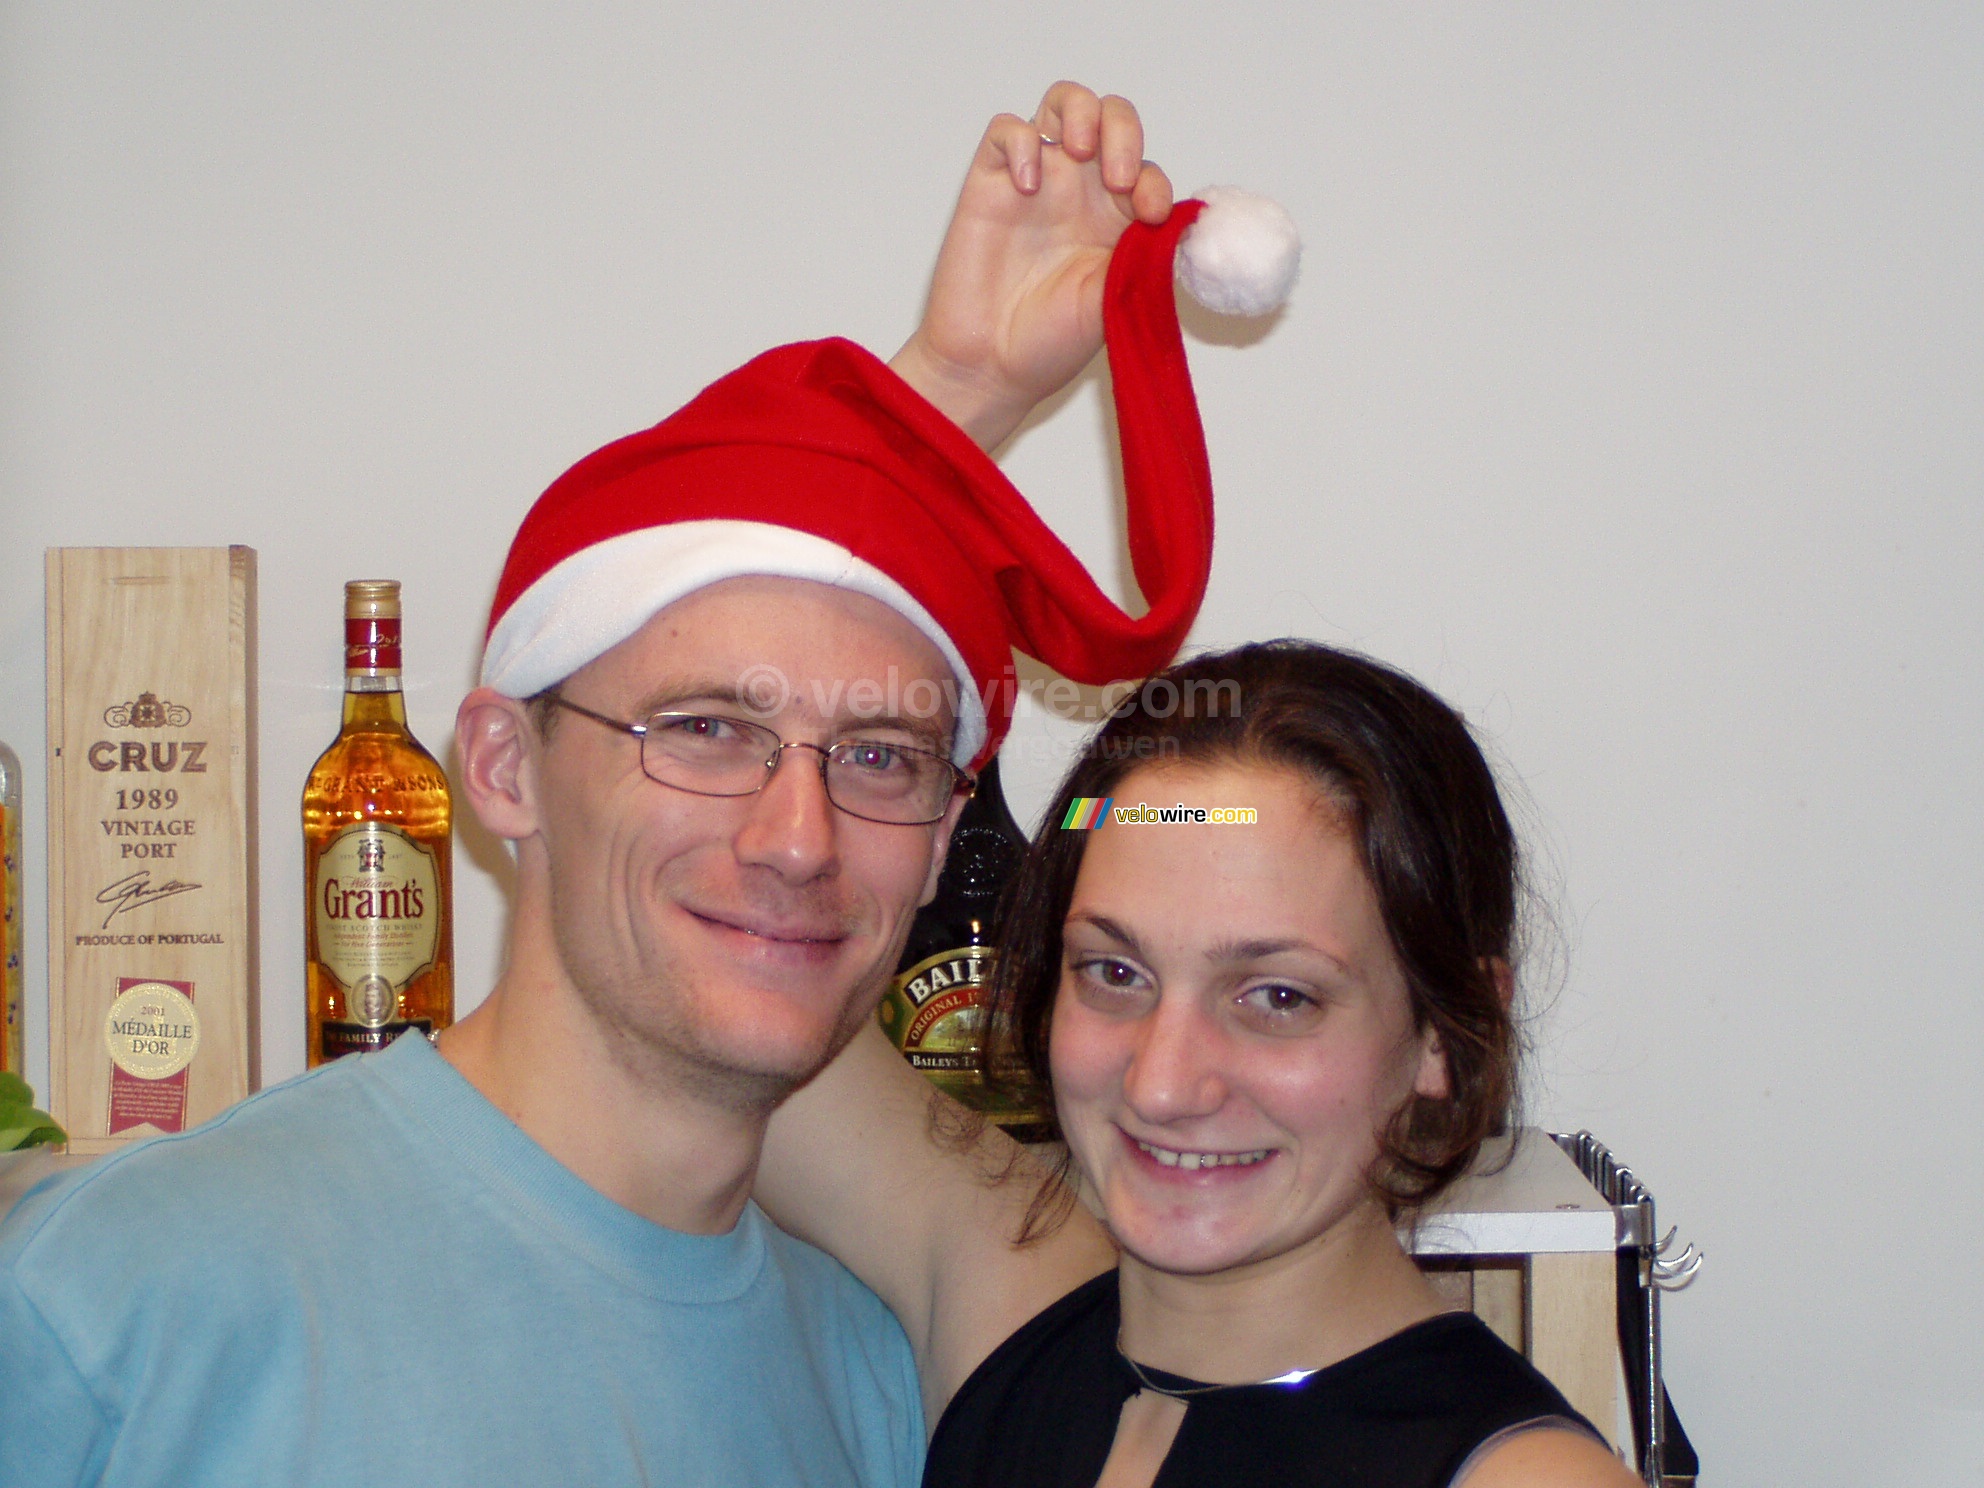 Florent & Marie-Laure with a Christmas hat